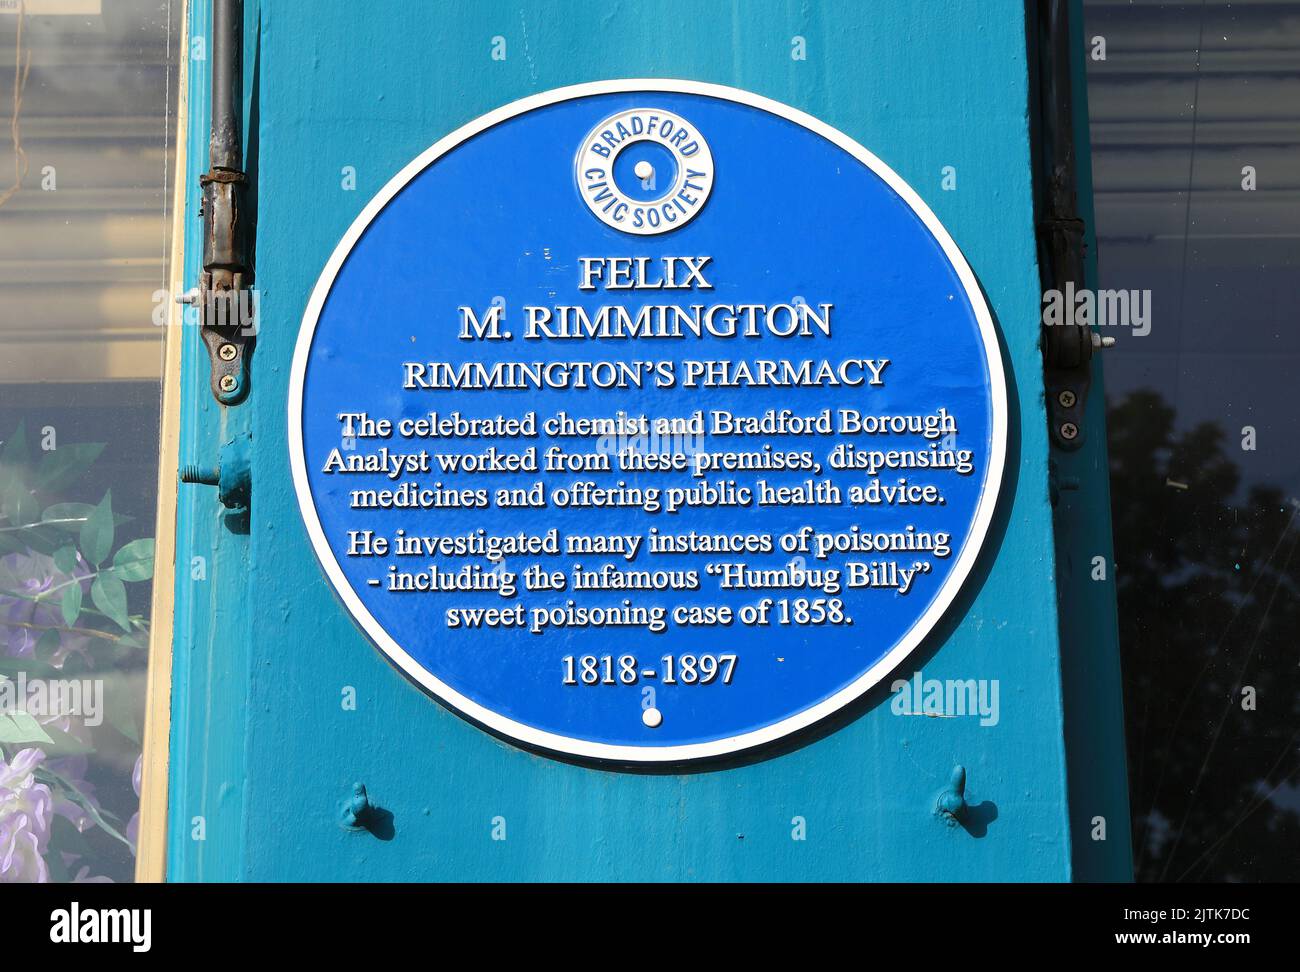 Blue plaque for Felix M. Rimmington's Pharmacy, the celebrated chemist (1818-1897) worked here investigated many instances of poisoning, in Bradford. Stock Photo